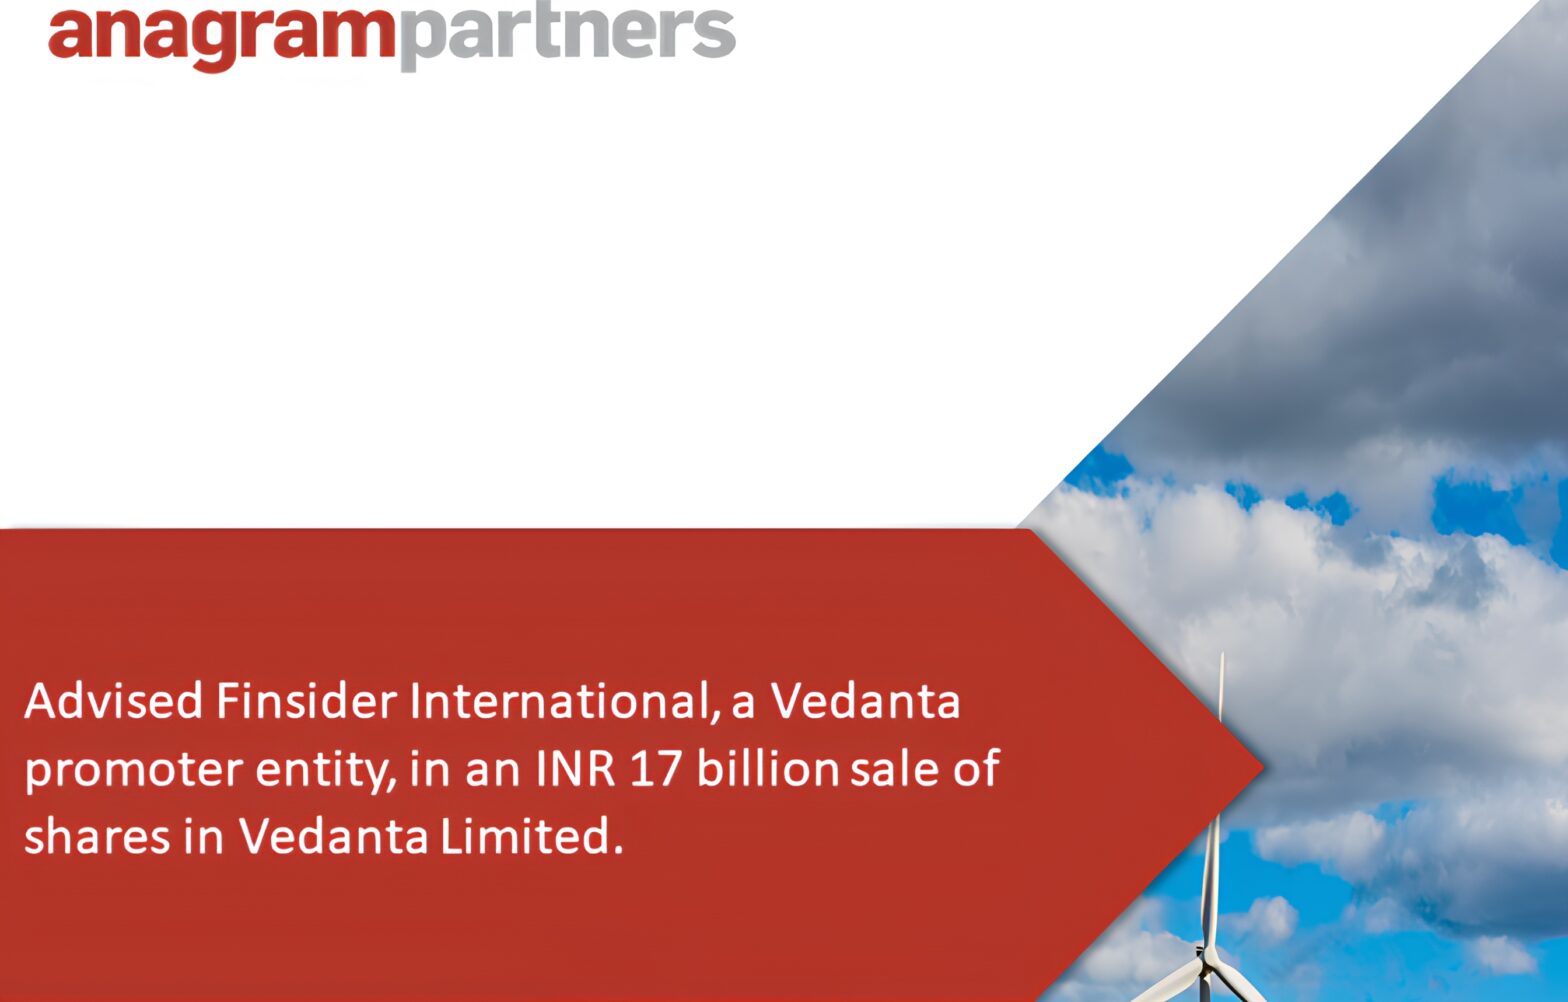 Anagram Partners advised Finsider International, a Vedanta promoter group entity, in an INR 17 billion bulk deal involving the sale of its shares in Vedanta Limited.